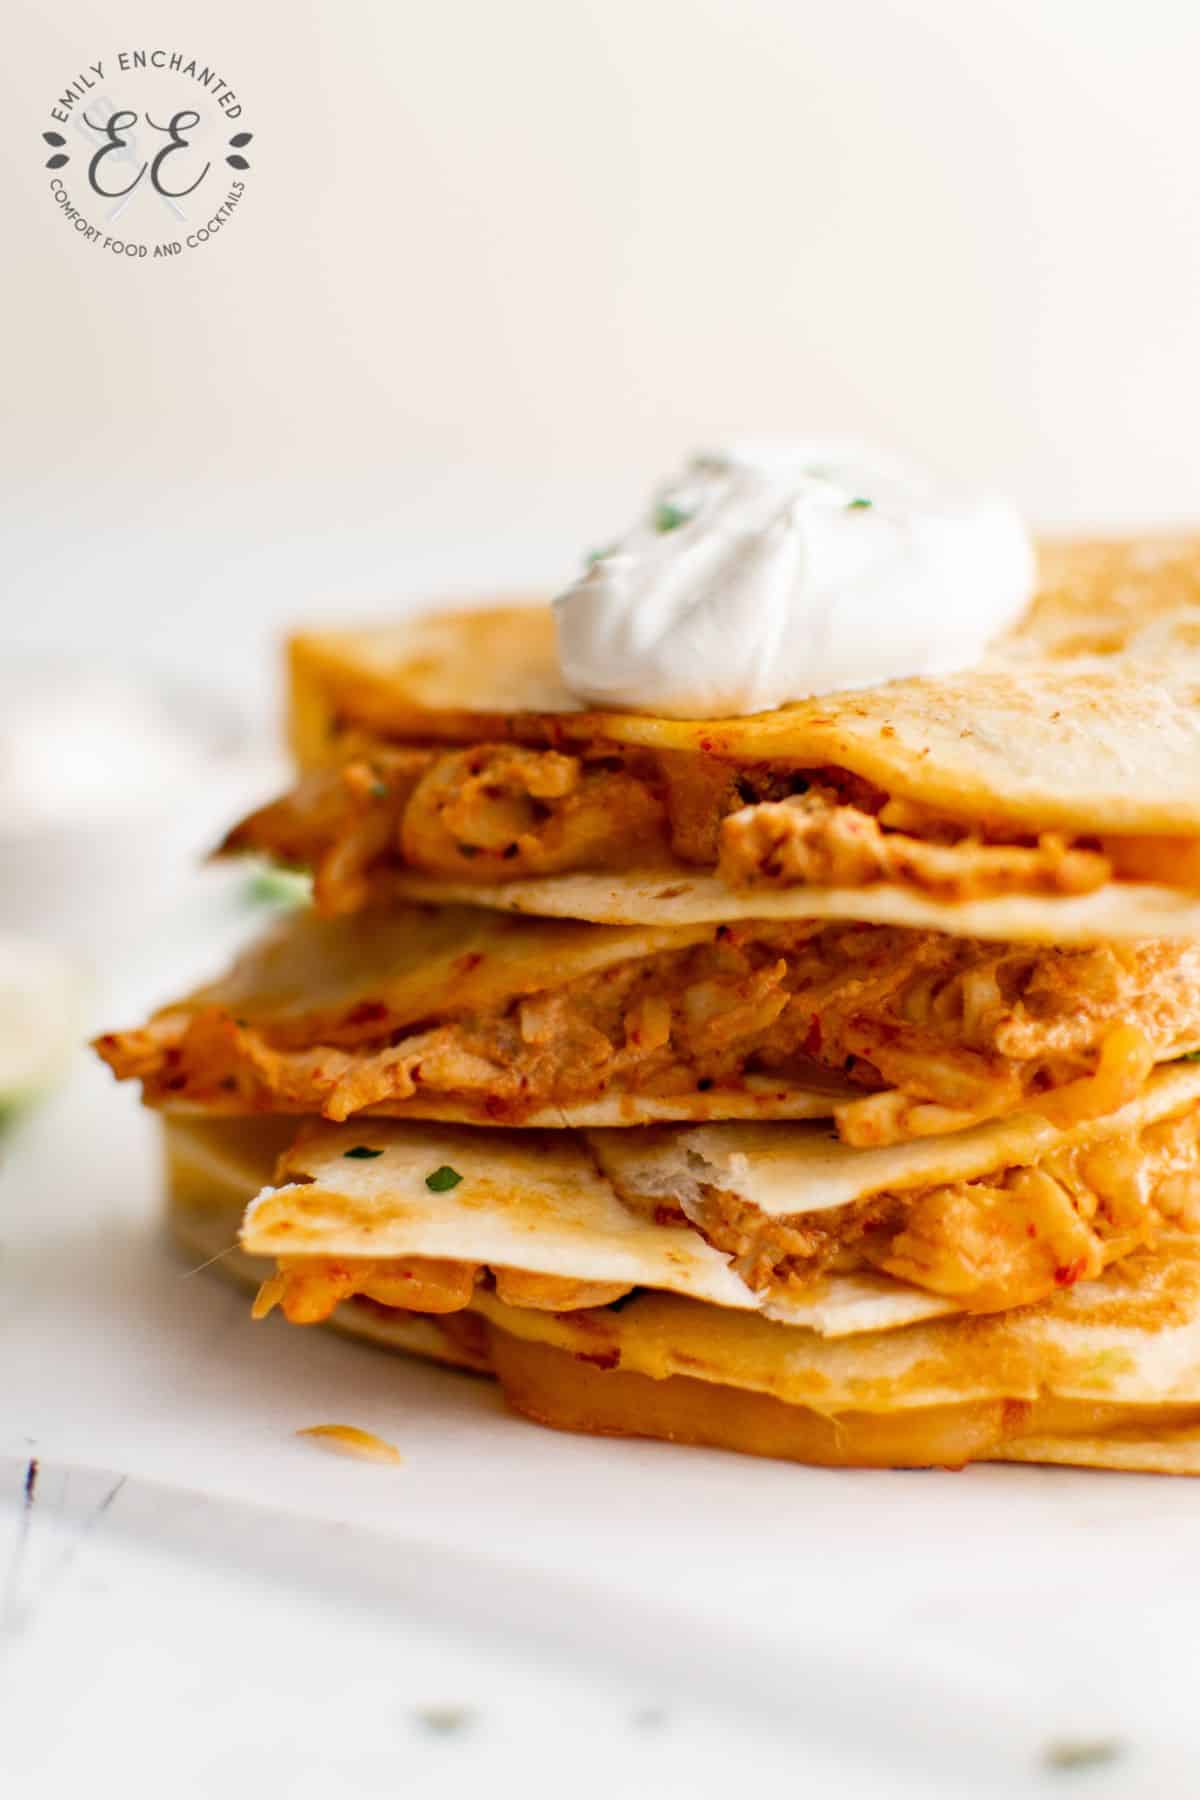 Stack of quesadillas on a plate